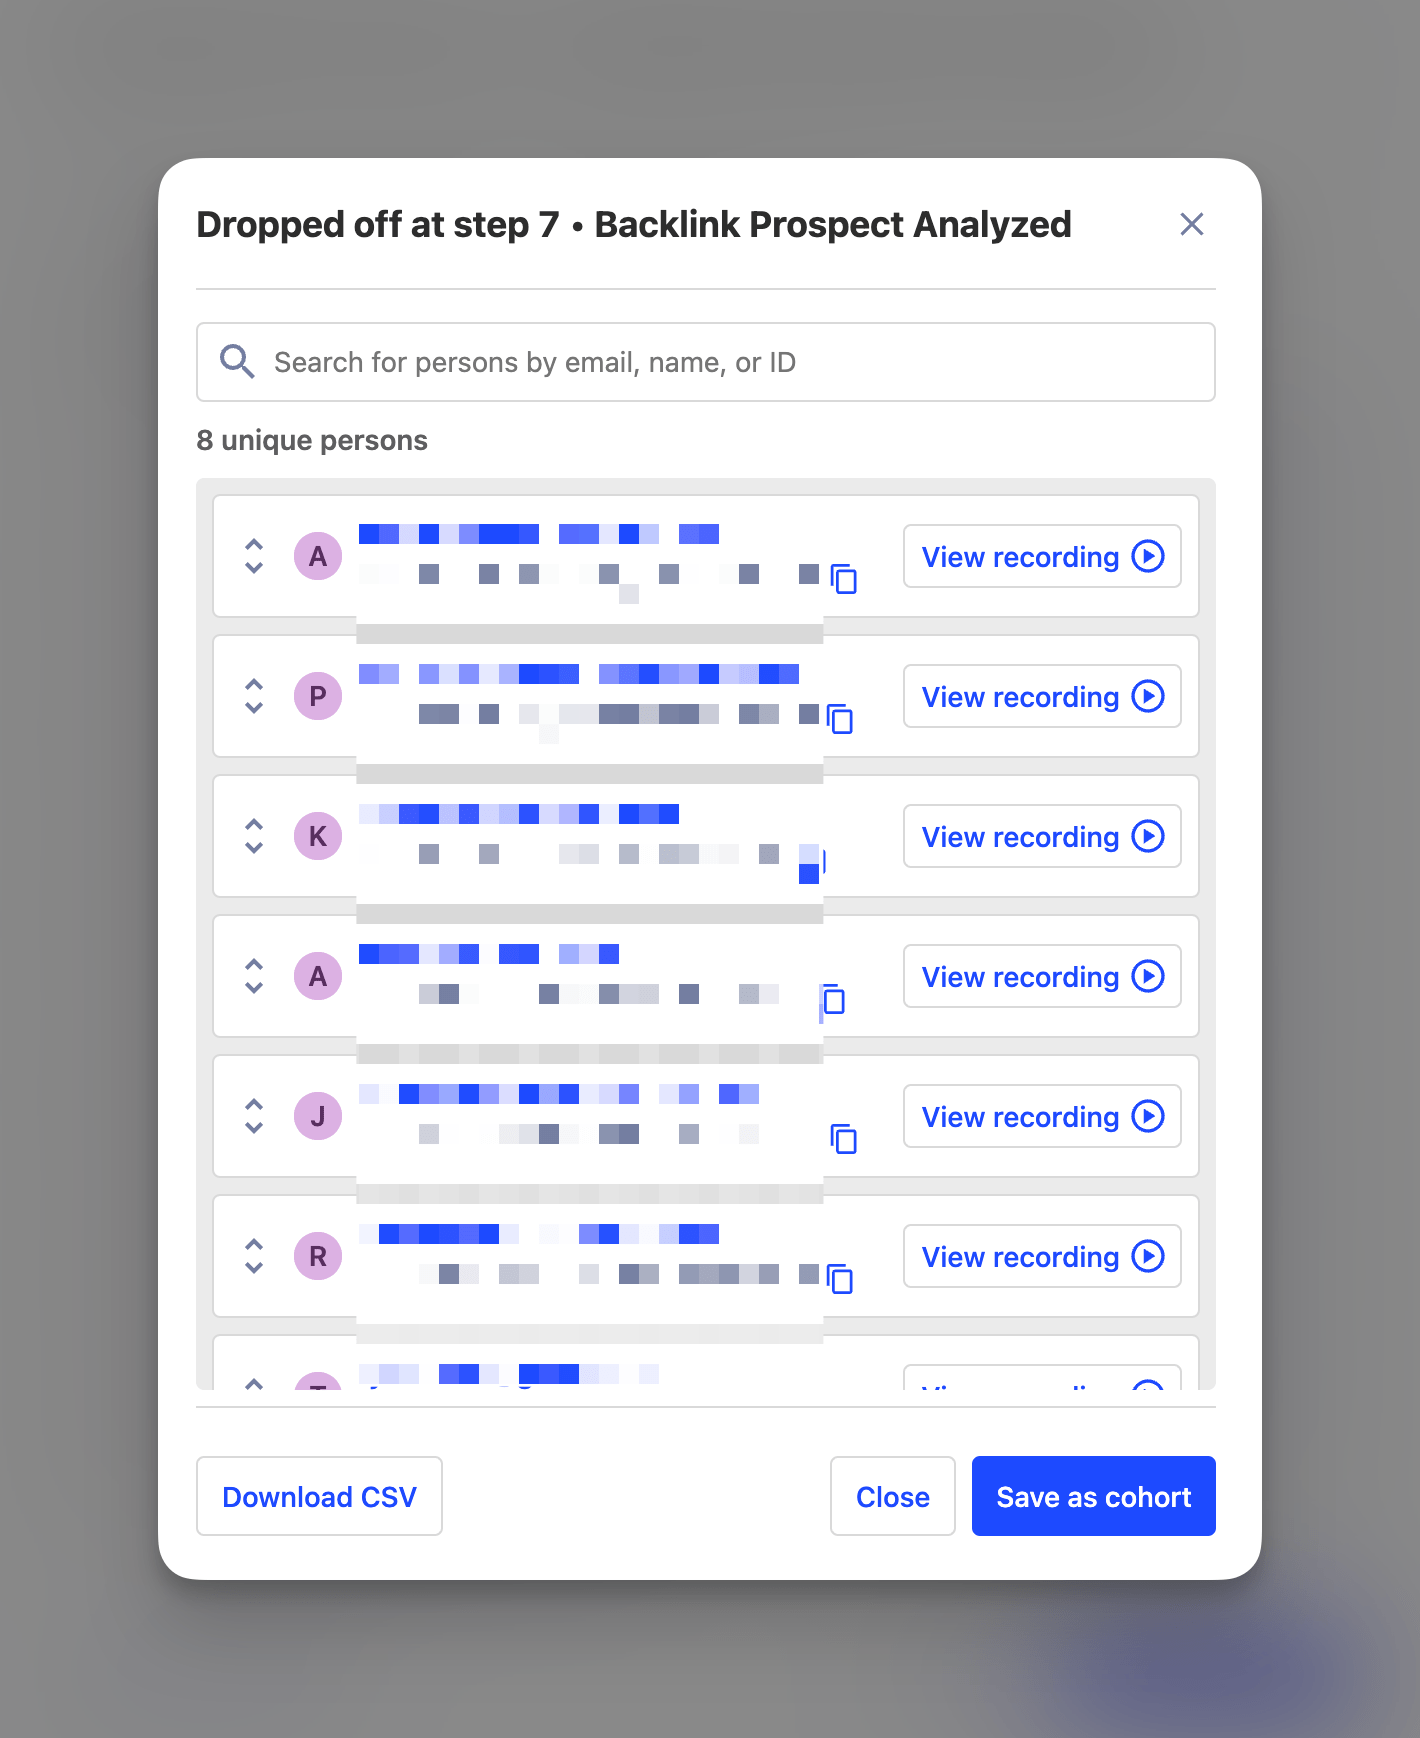 Detailed User Journey Drop-off Analysis